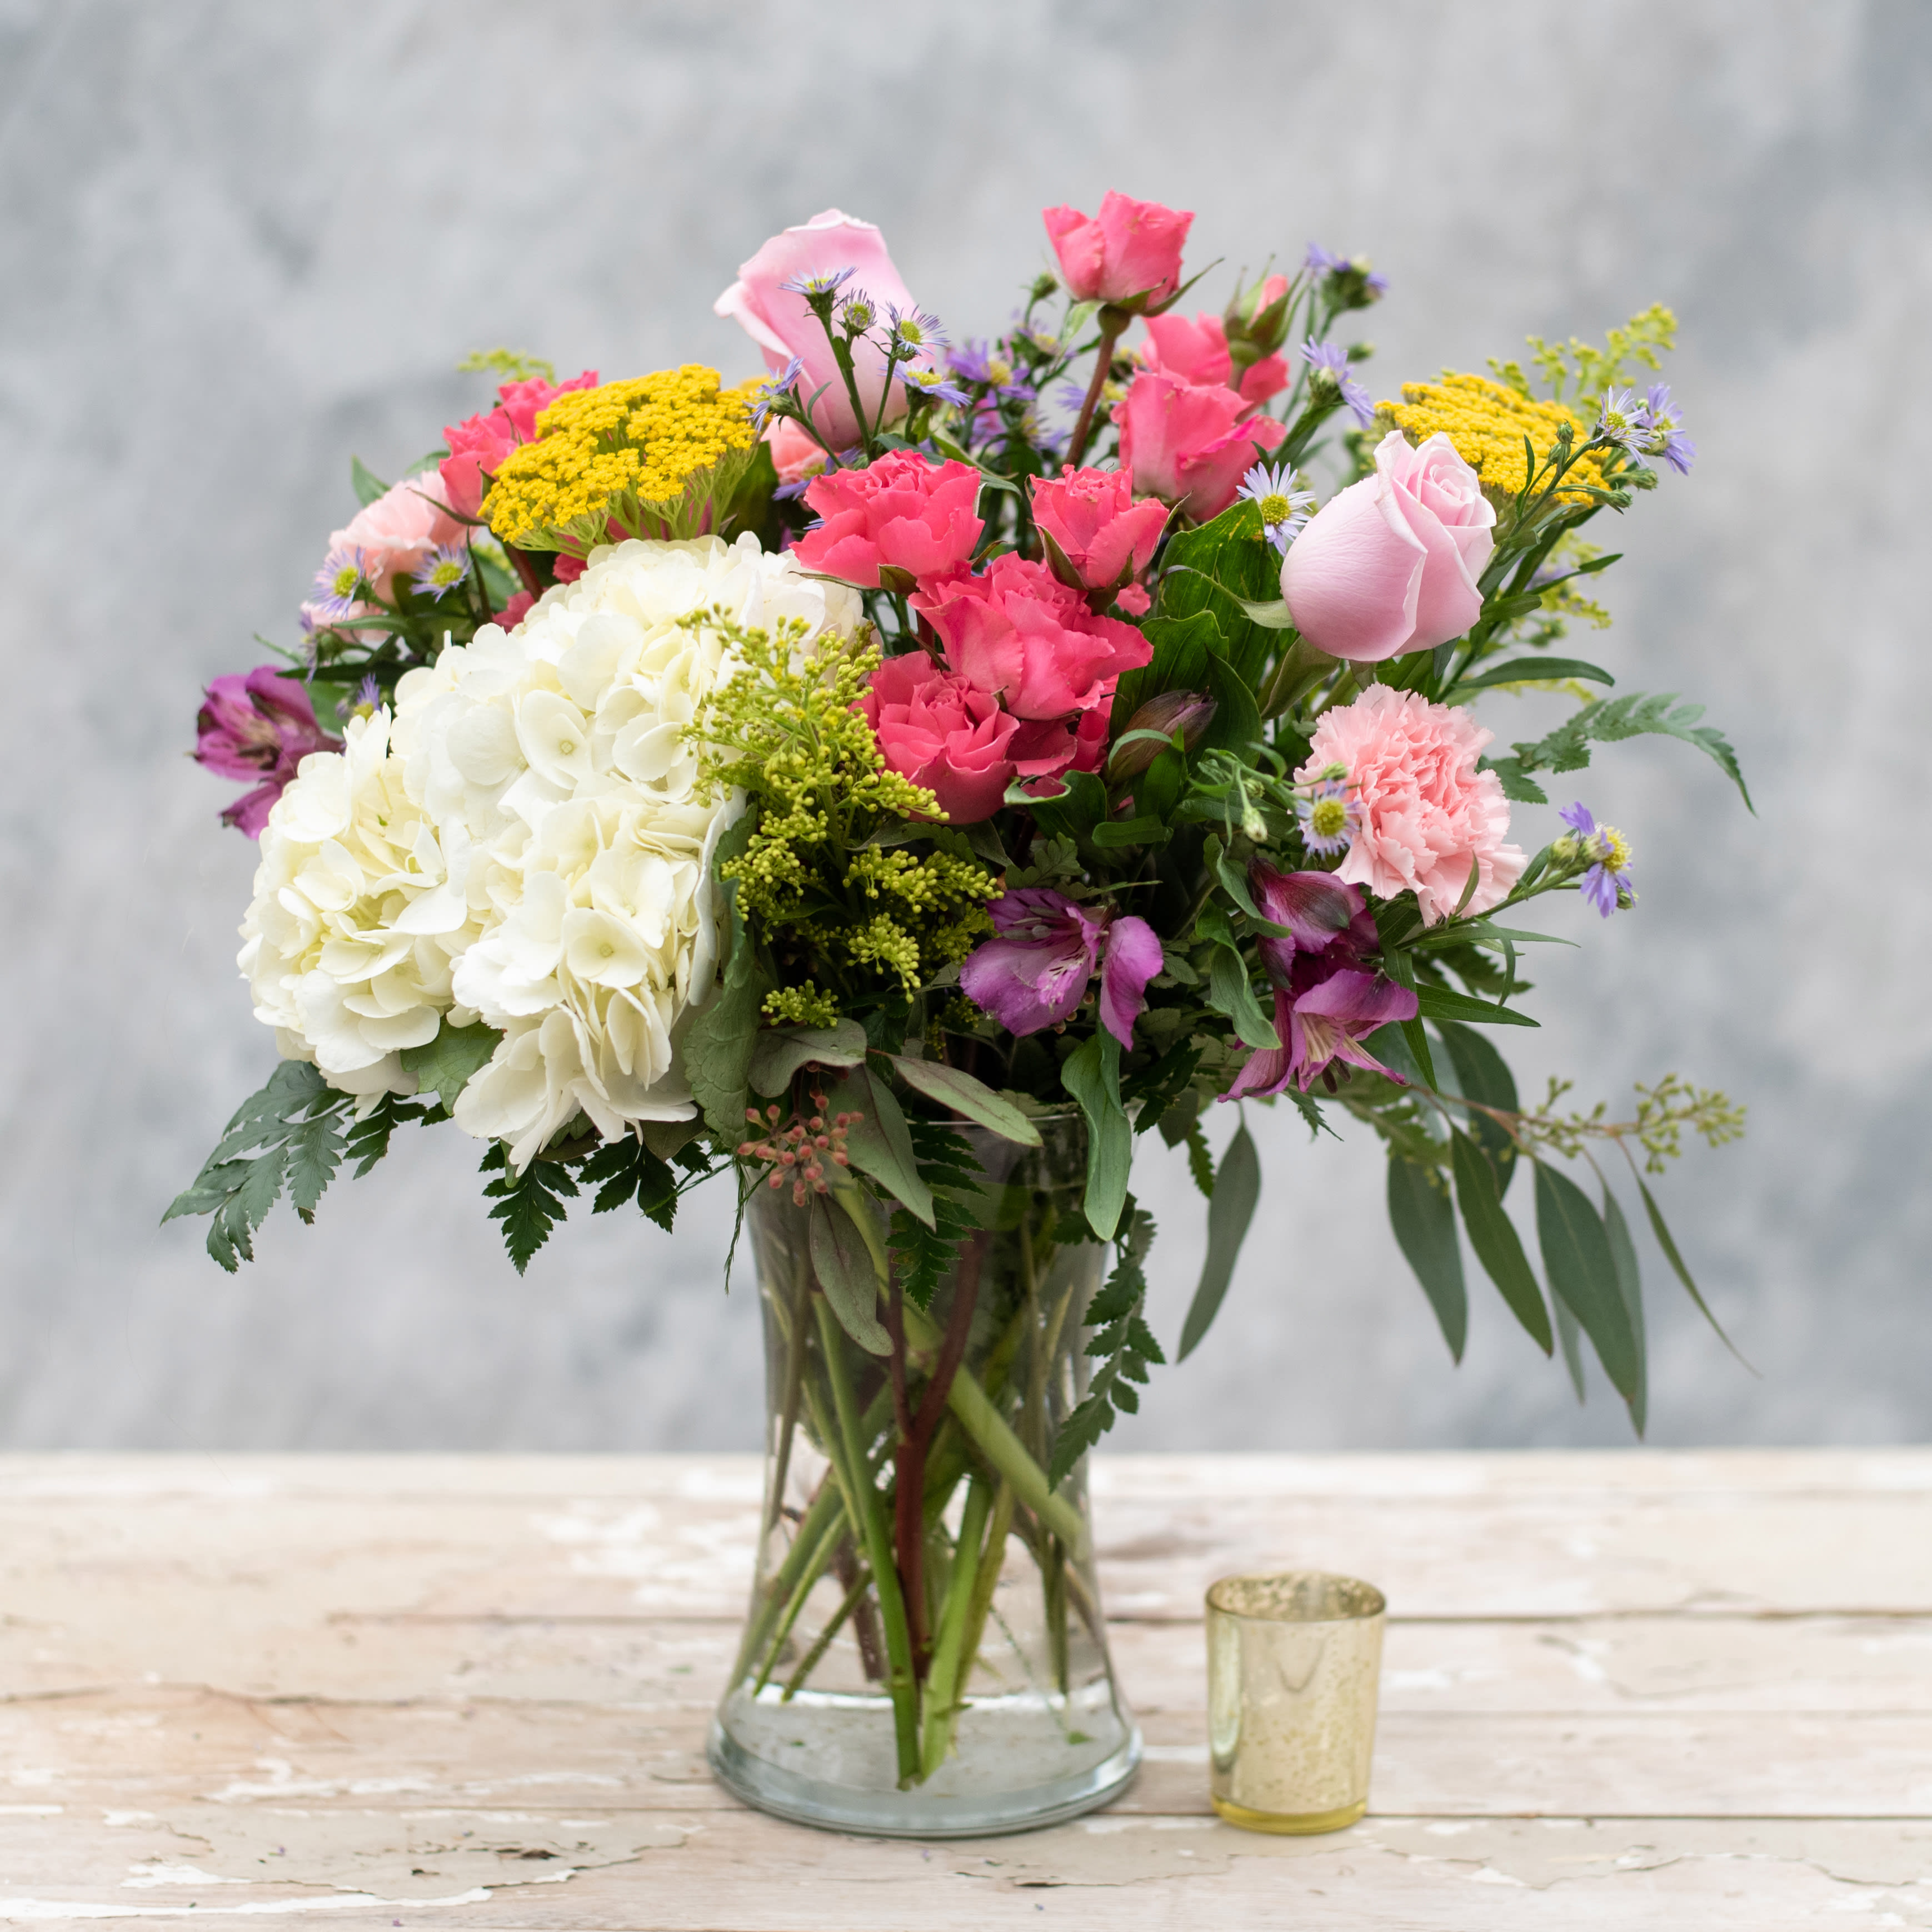 Sweet Garden - Time to bring your &quot;Sweet Garden&quot; inside with this 8&quot; clear gathering vase filled with the colors of spring, including pink spray roses, purple alstroemeria, pink carnations, white hydrangea, yarrow and more.  